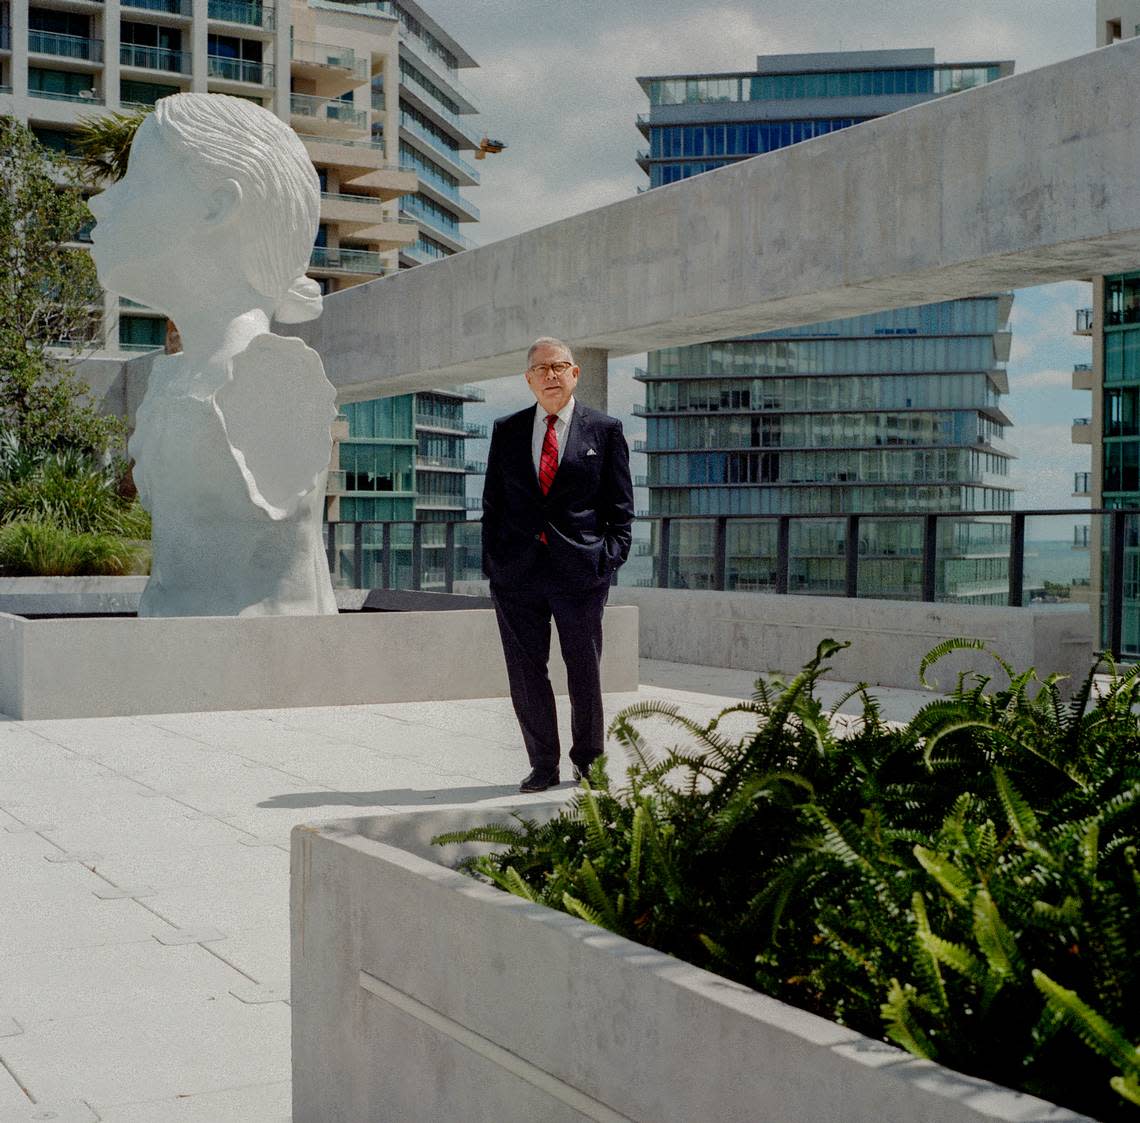 Alberto Ibargüen stands next to ‘The Well’ by Enrique Martinez Celaya, on the rooftop sculpture garden in Coconut Grove, Florida, where the Knight Foundation offices are located.